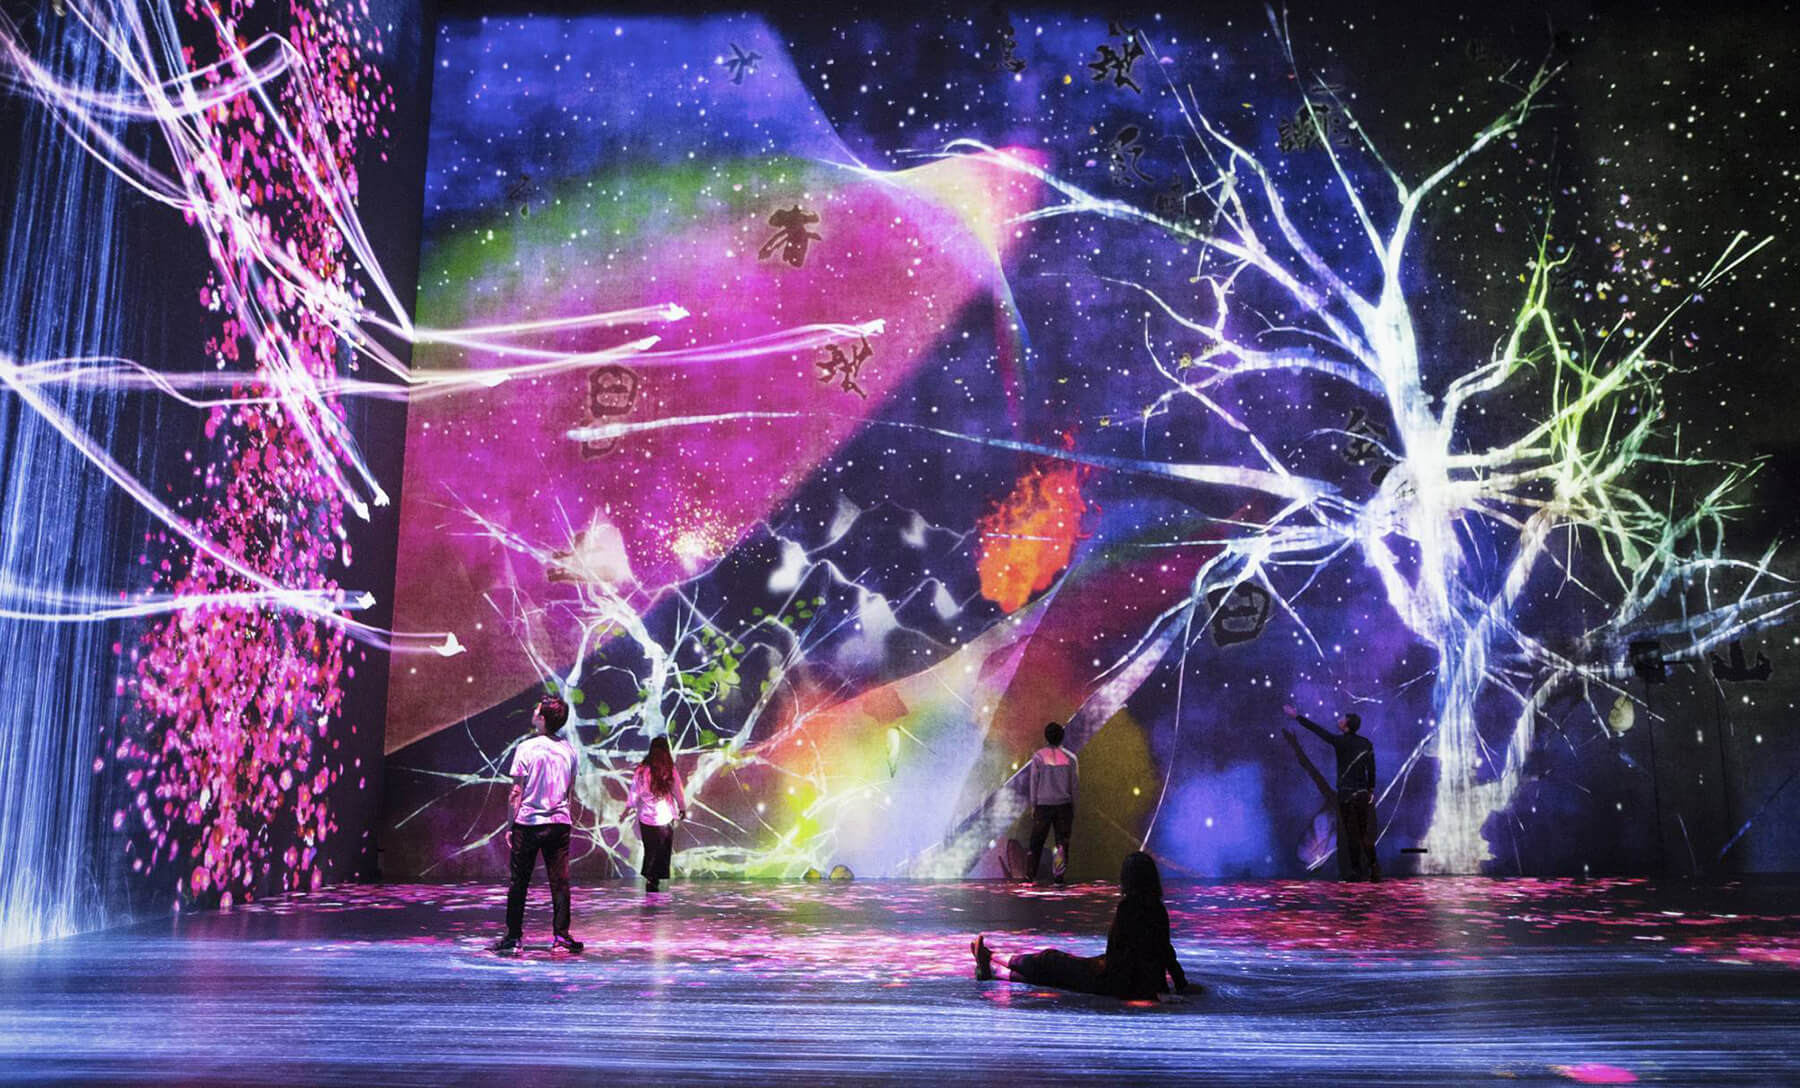 teamLab art viewers gaze at a room full of digital trees, birds, and outer space. 